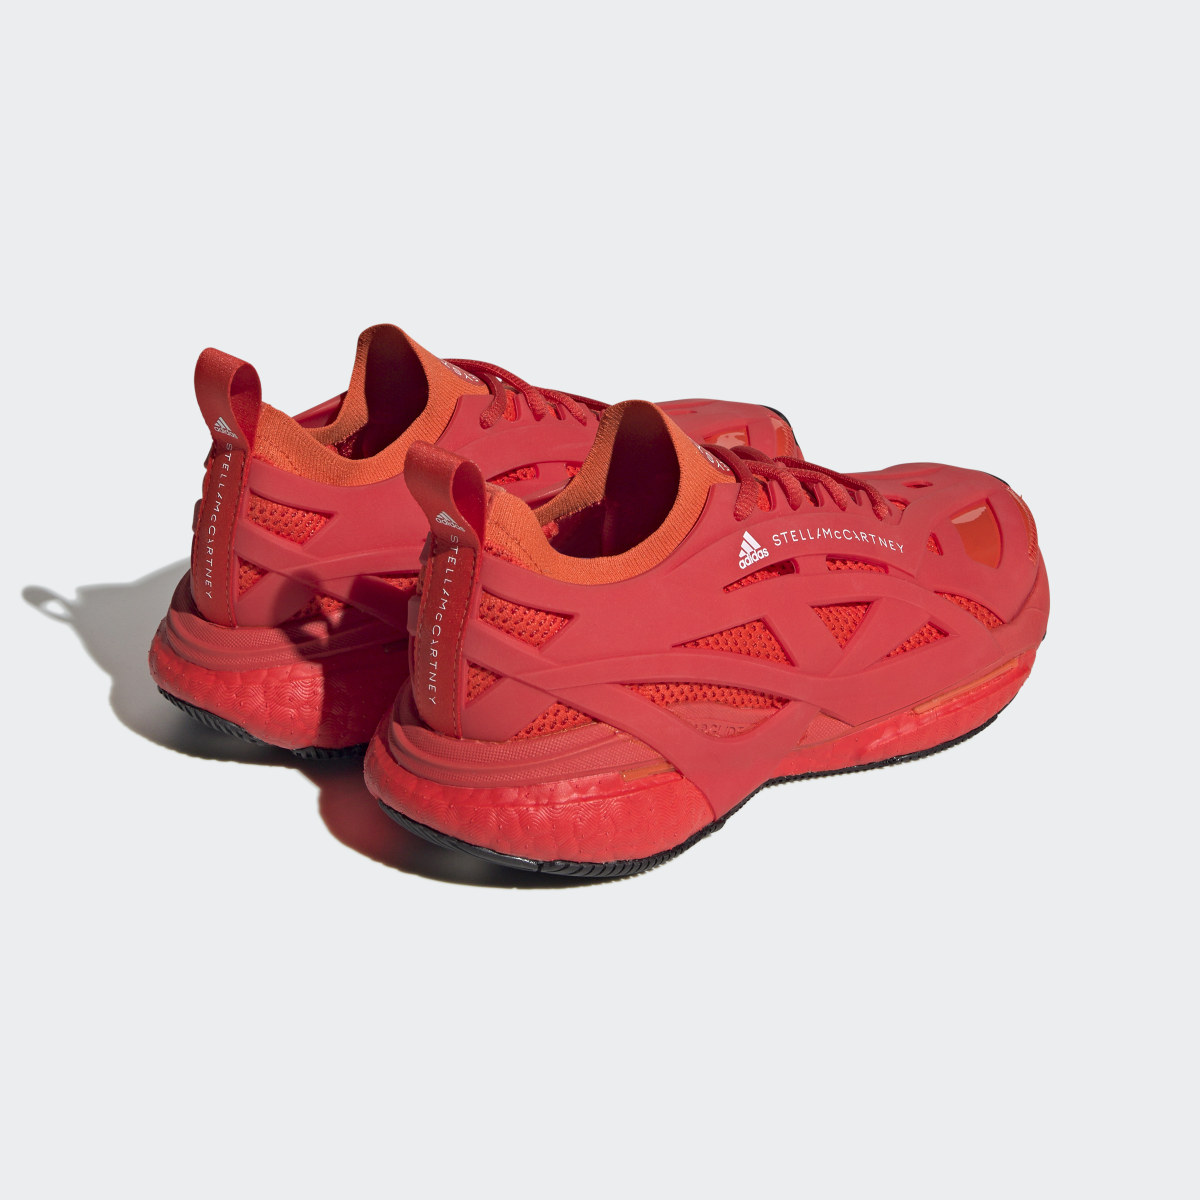 Adidas by Stella McCartney Solarglide Running Shoes. 6